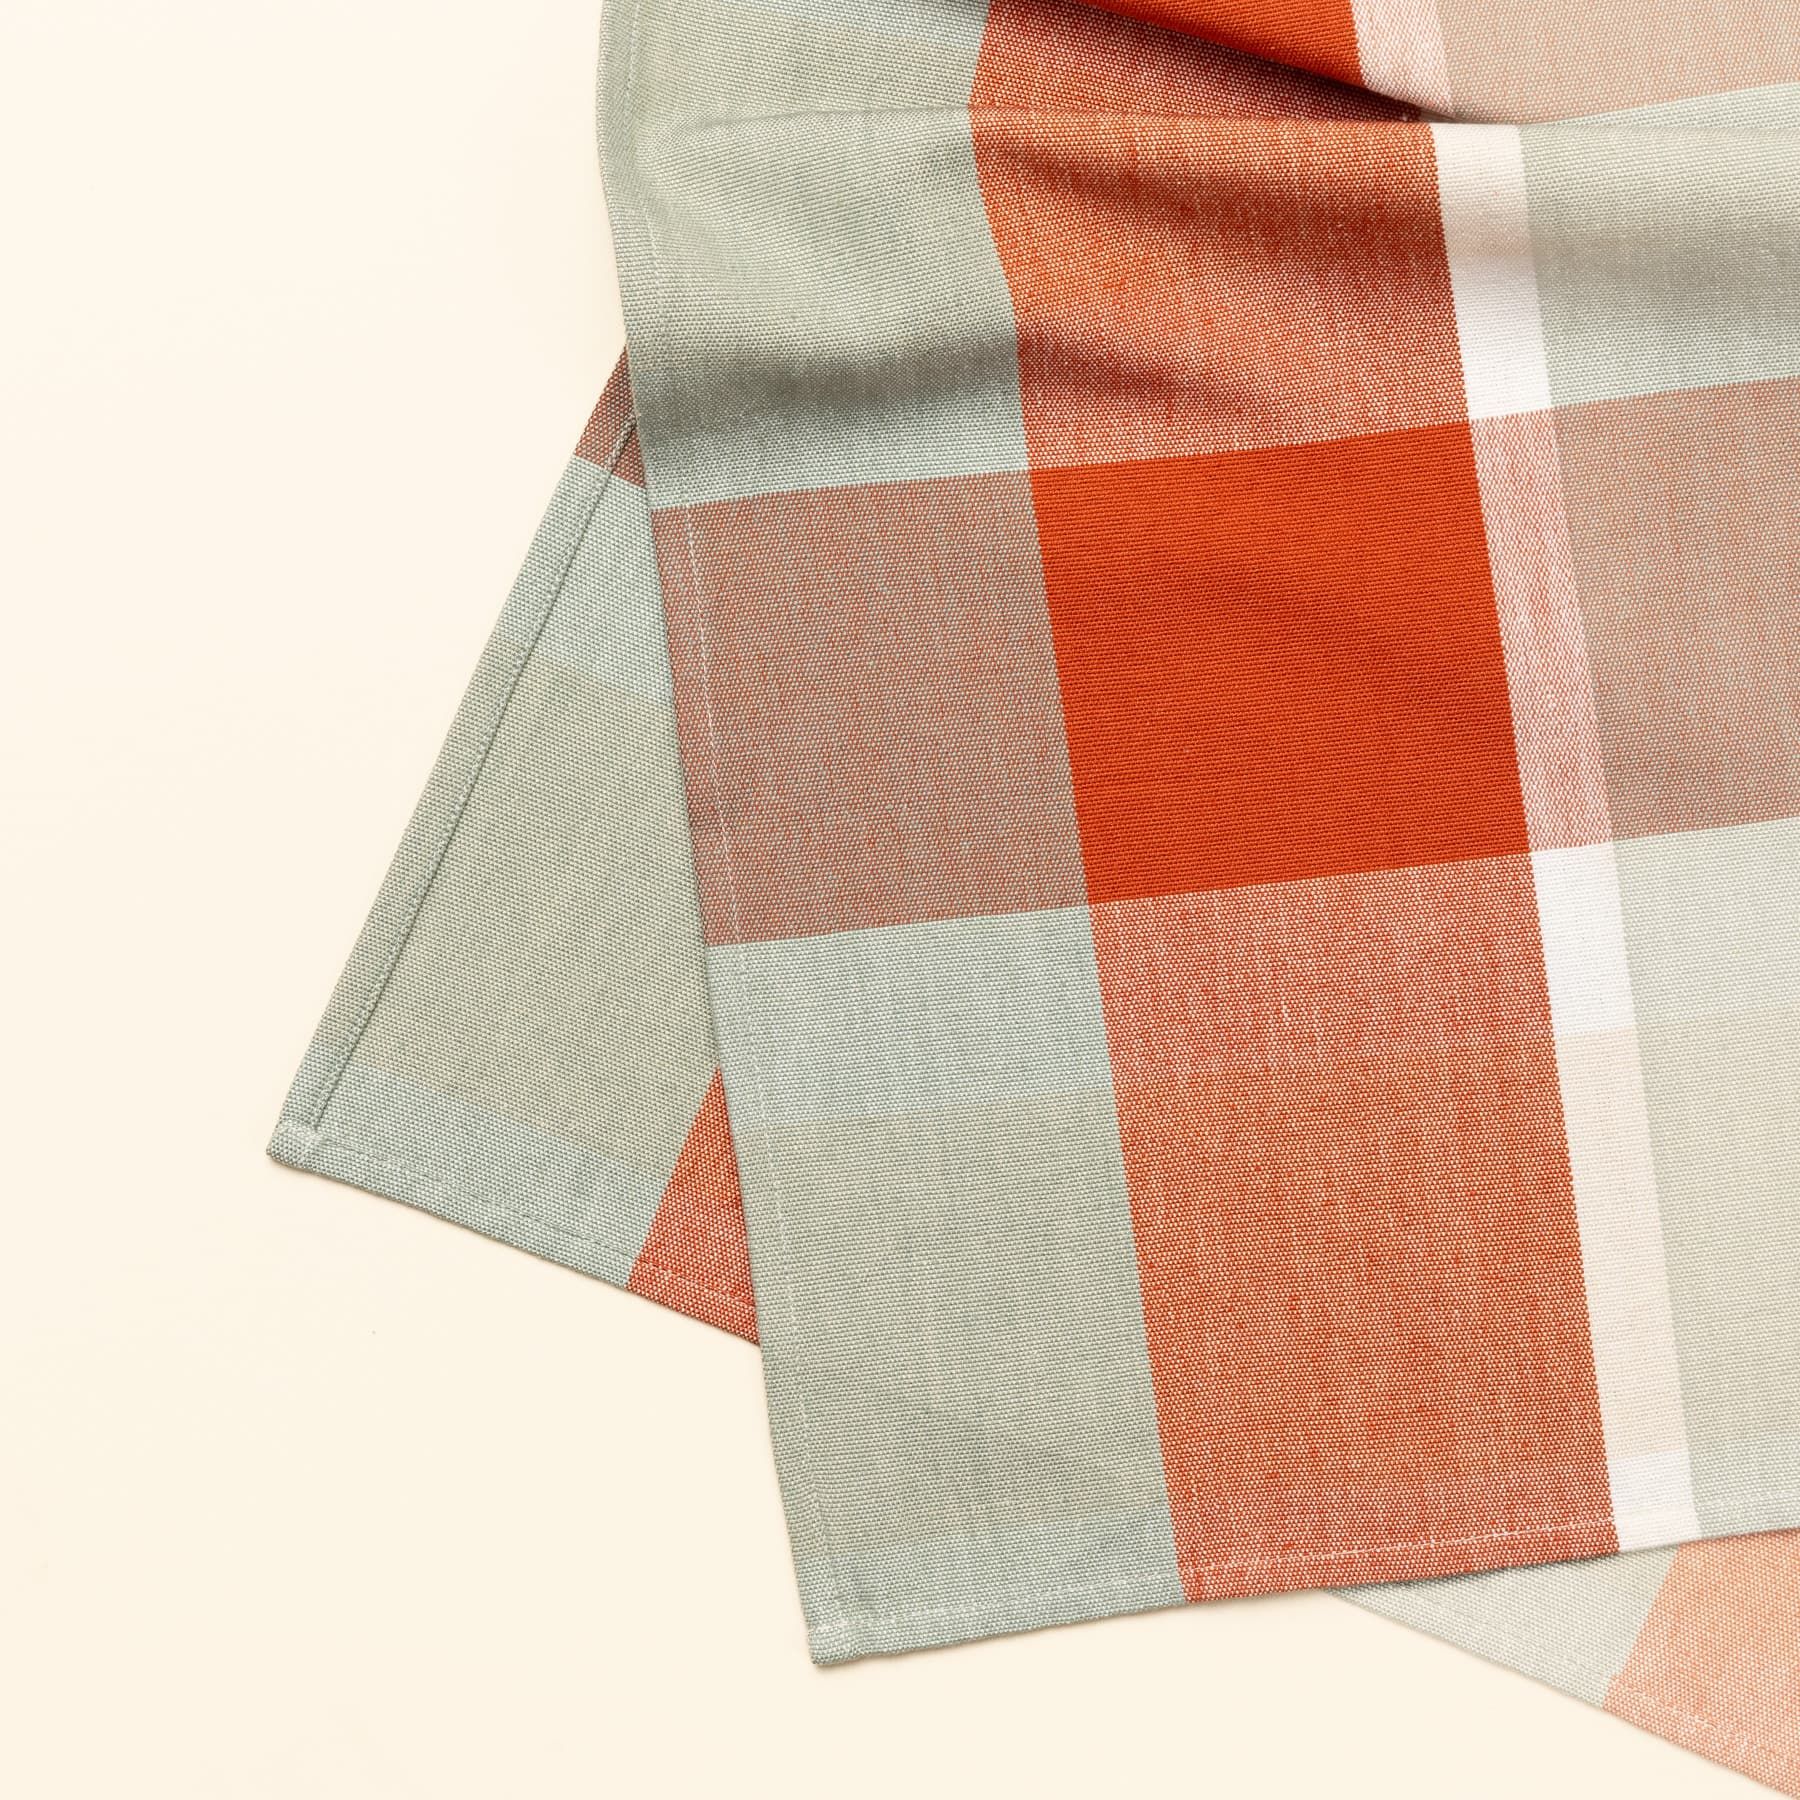 A close up of a corner of a gingham table runner featuring colors of sage green, bold orange, and cream.